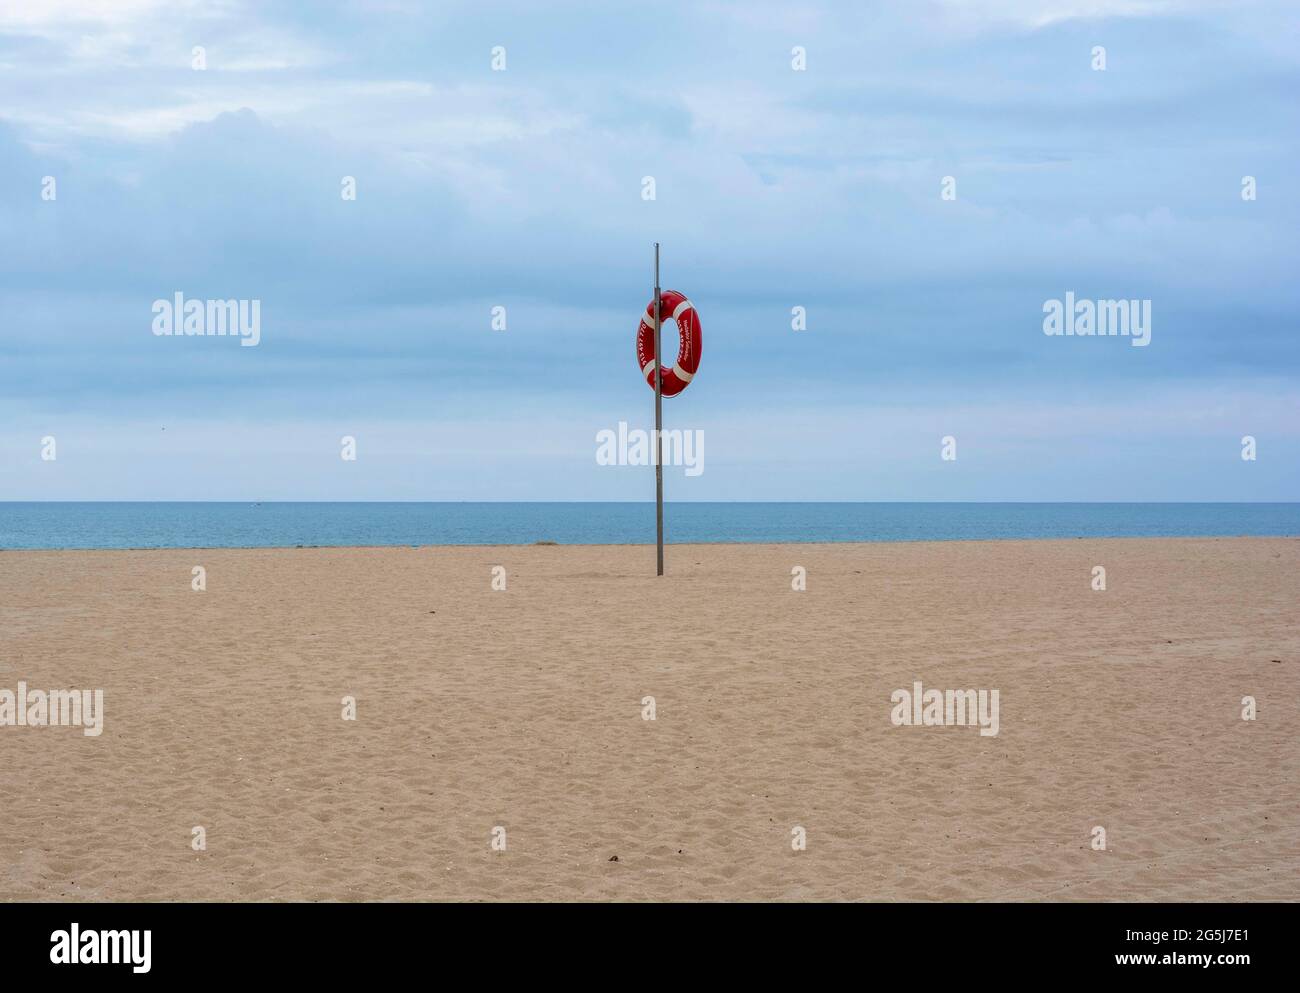 Simplicity is key. Deserted Beach in Vilamoura, Portugal. Although taken a while back, it's fitting giving the current restrictions. Stock Photo